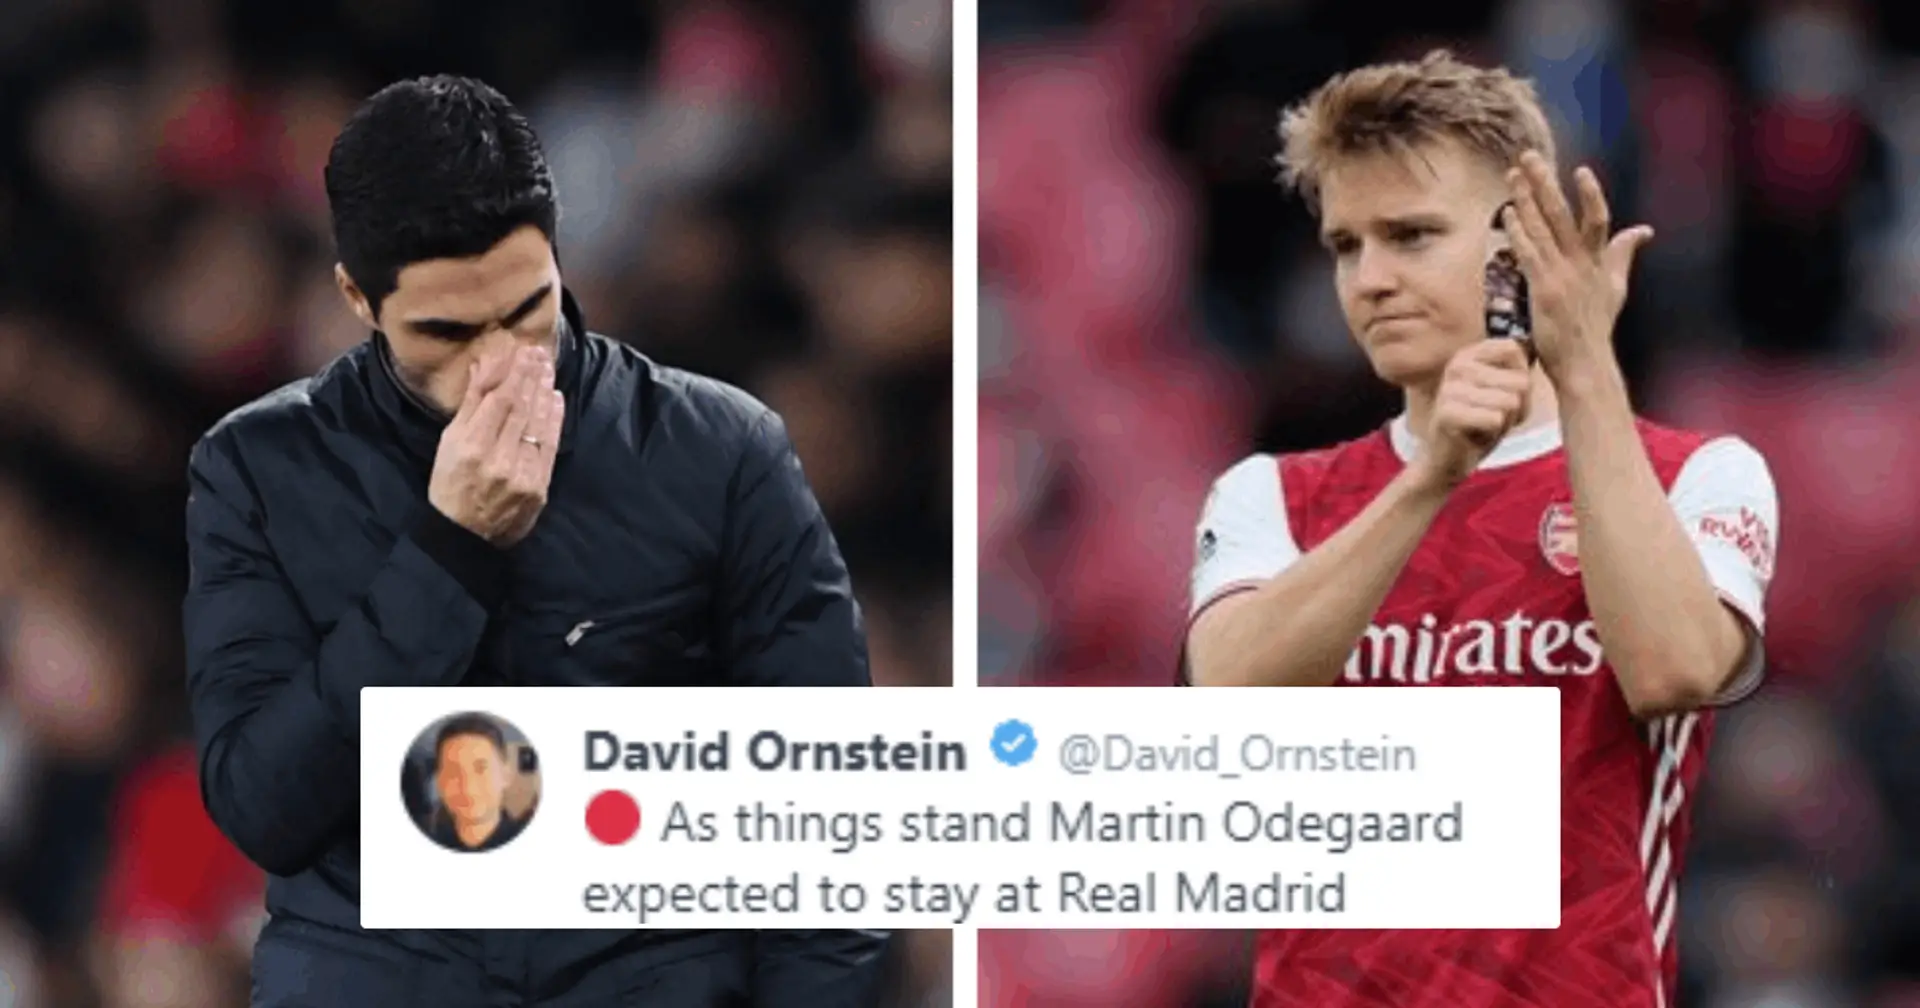 David Ornstein: Arsenal set to explore no. 10 options 'more aggressively' as Martin Odegaard likely to stay at Real Madrid